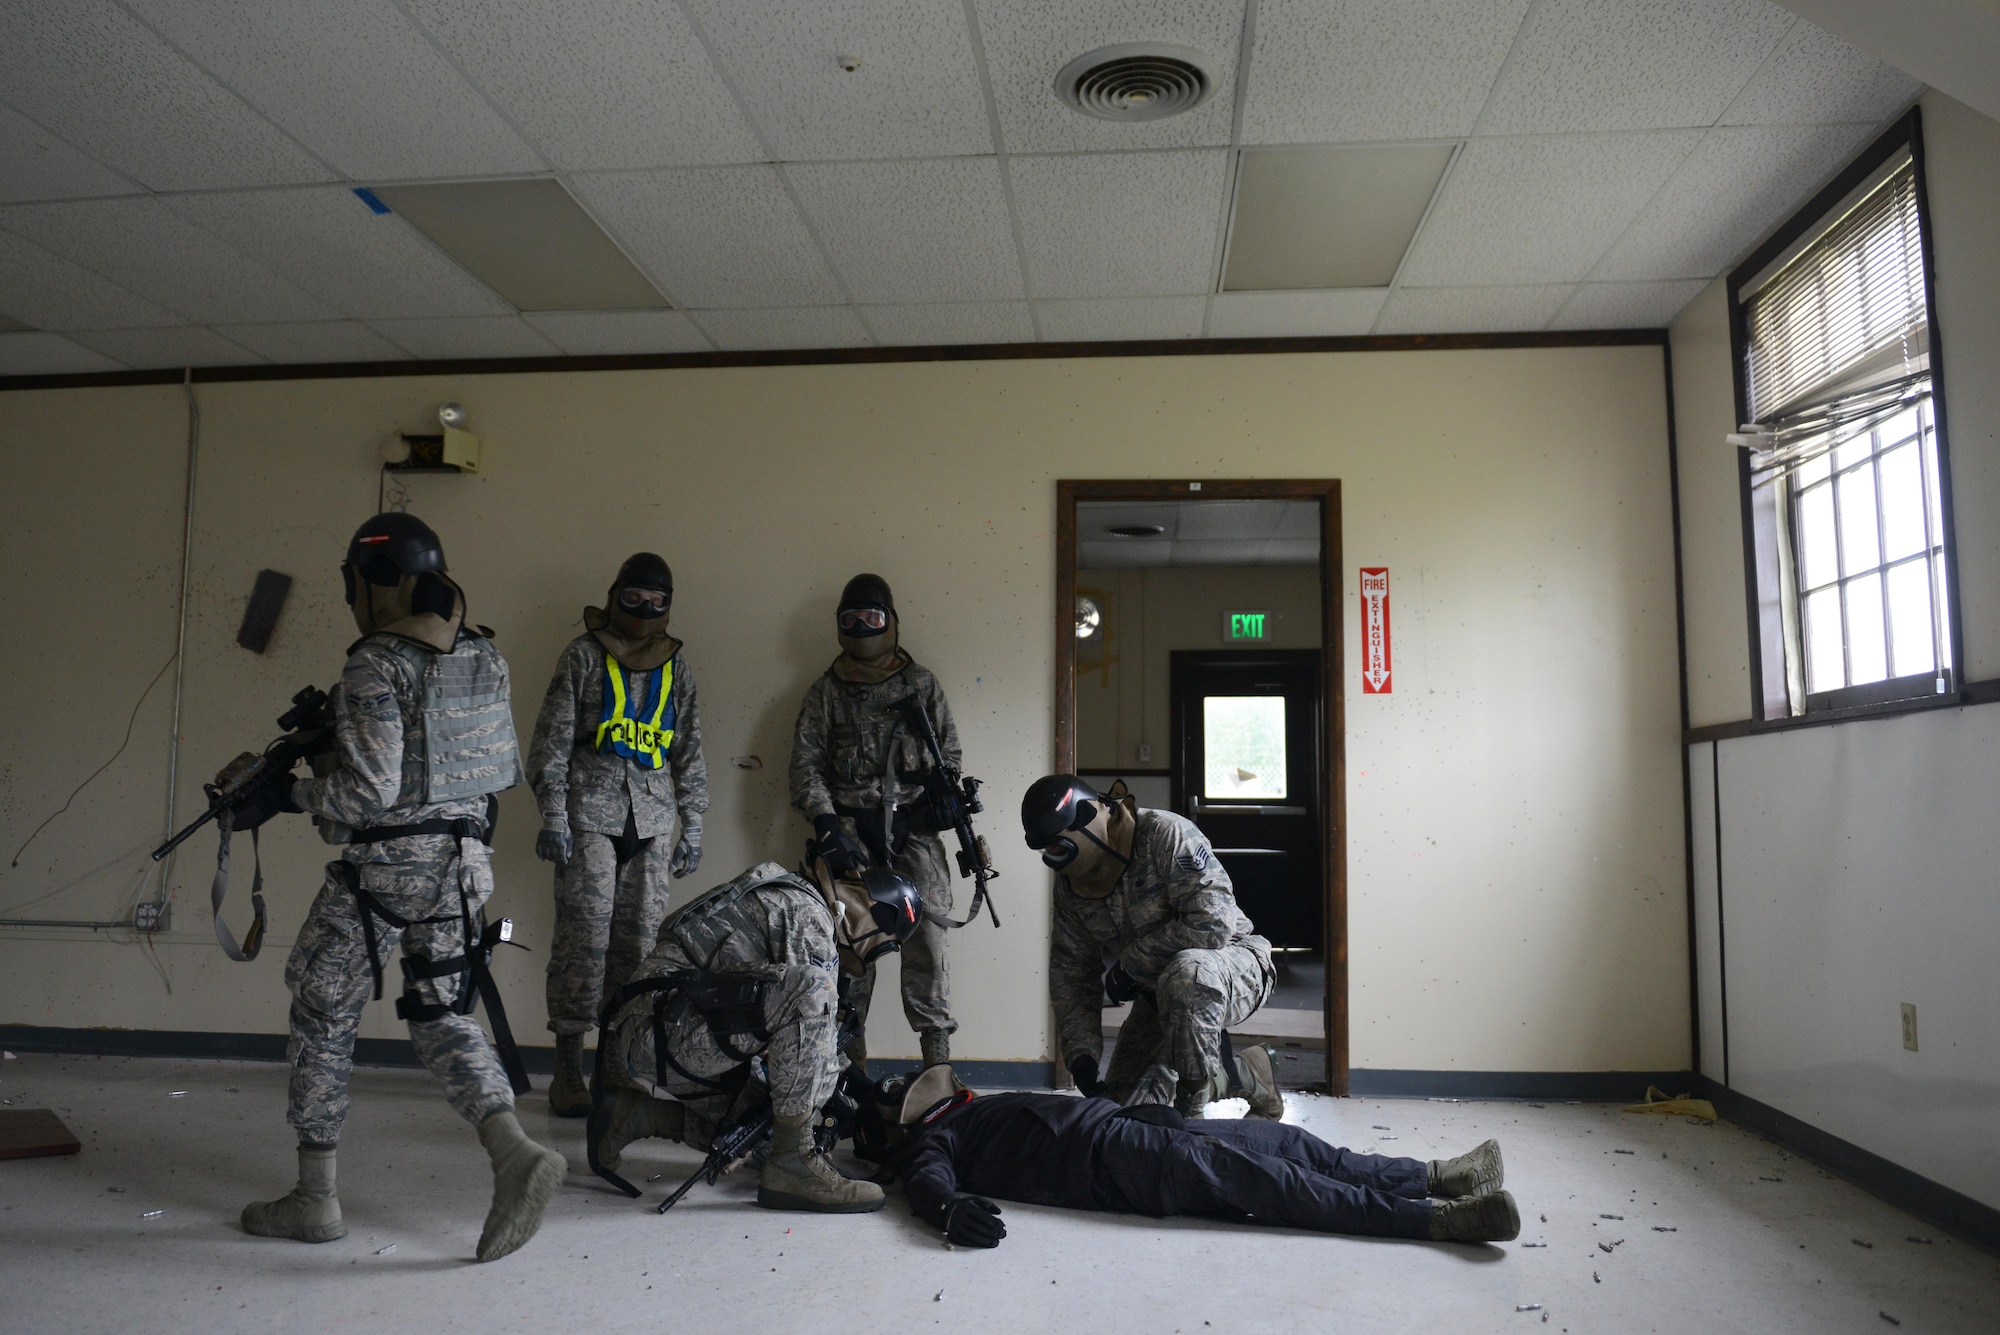 A team of 673d Security Forces Squadron members identify the condition of a simulated perpetrator during active-shooter training at Joint Base Elmendorf-Richardson, Alaska, July 18, 2017. Security forces trained in high-stress environments with hostages and aggressive perpetrators so they learned how to appropriately respond and handle various hostile situations. (U.S. Air Force photo by Airman 1st Class Christopher R. Morales)